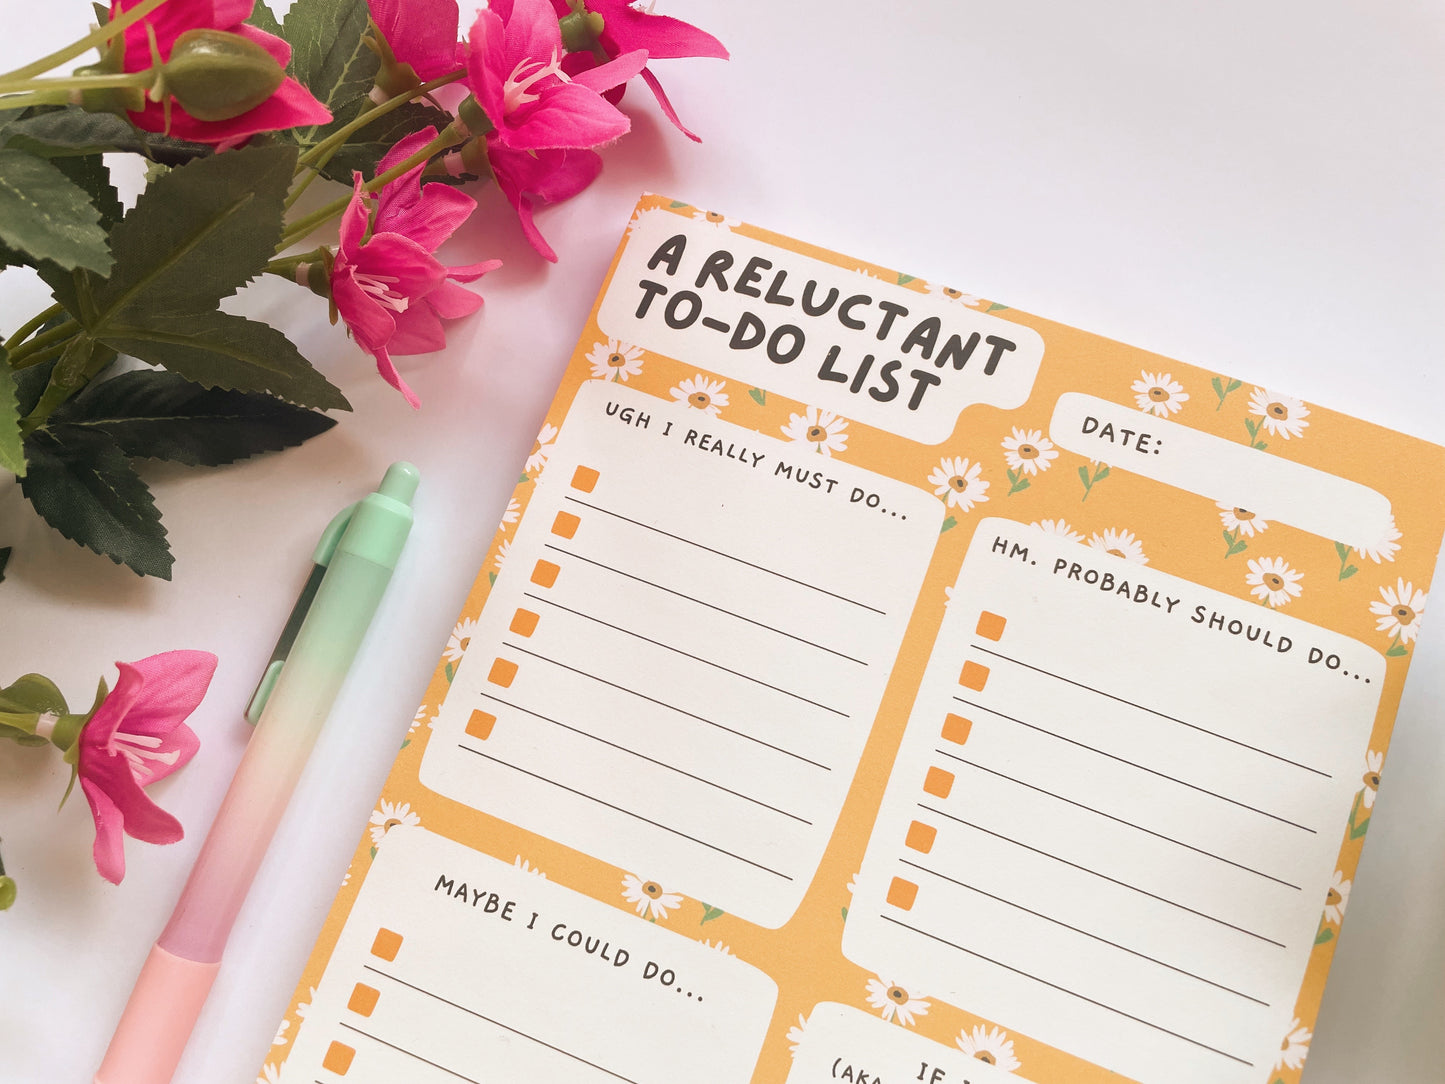 A5 Reluctant To-Do list Notepad - 100 Pages